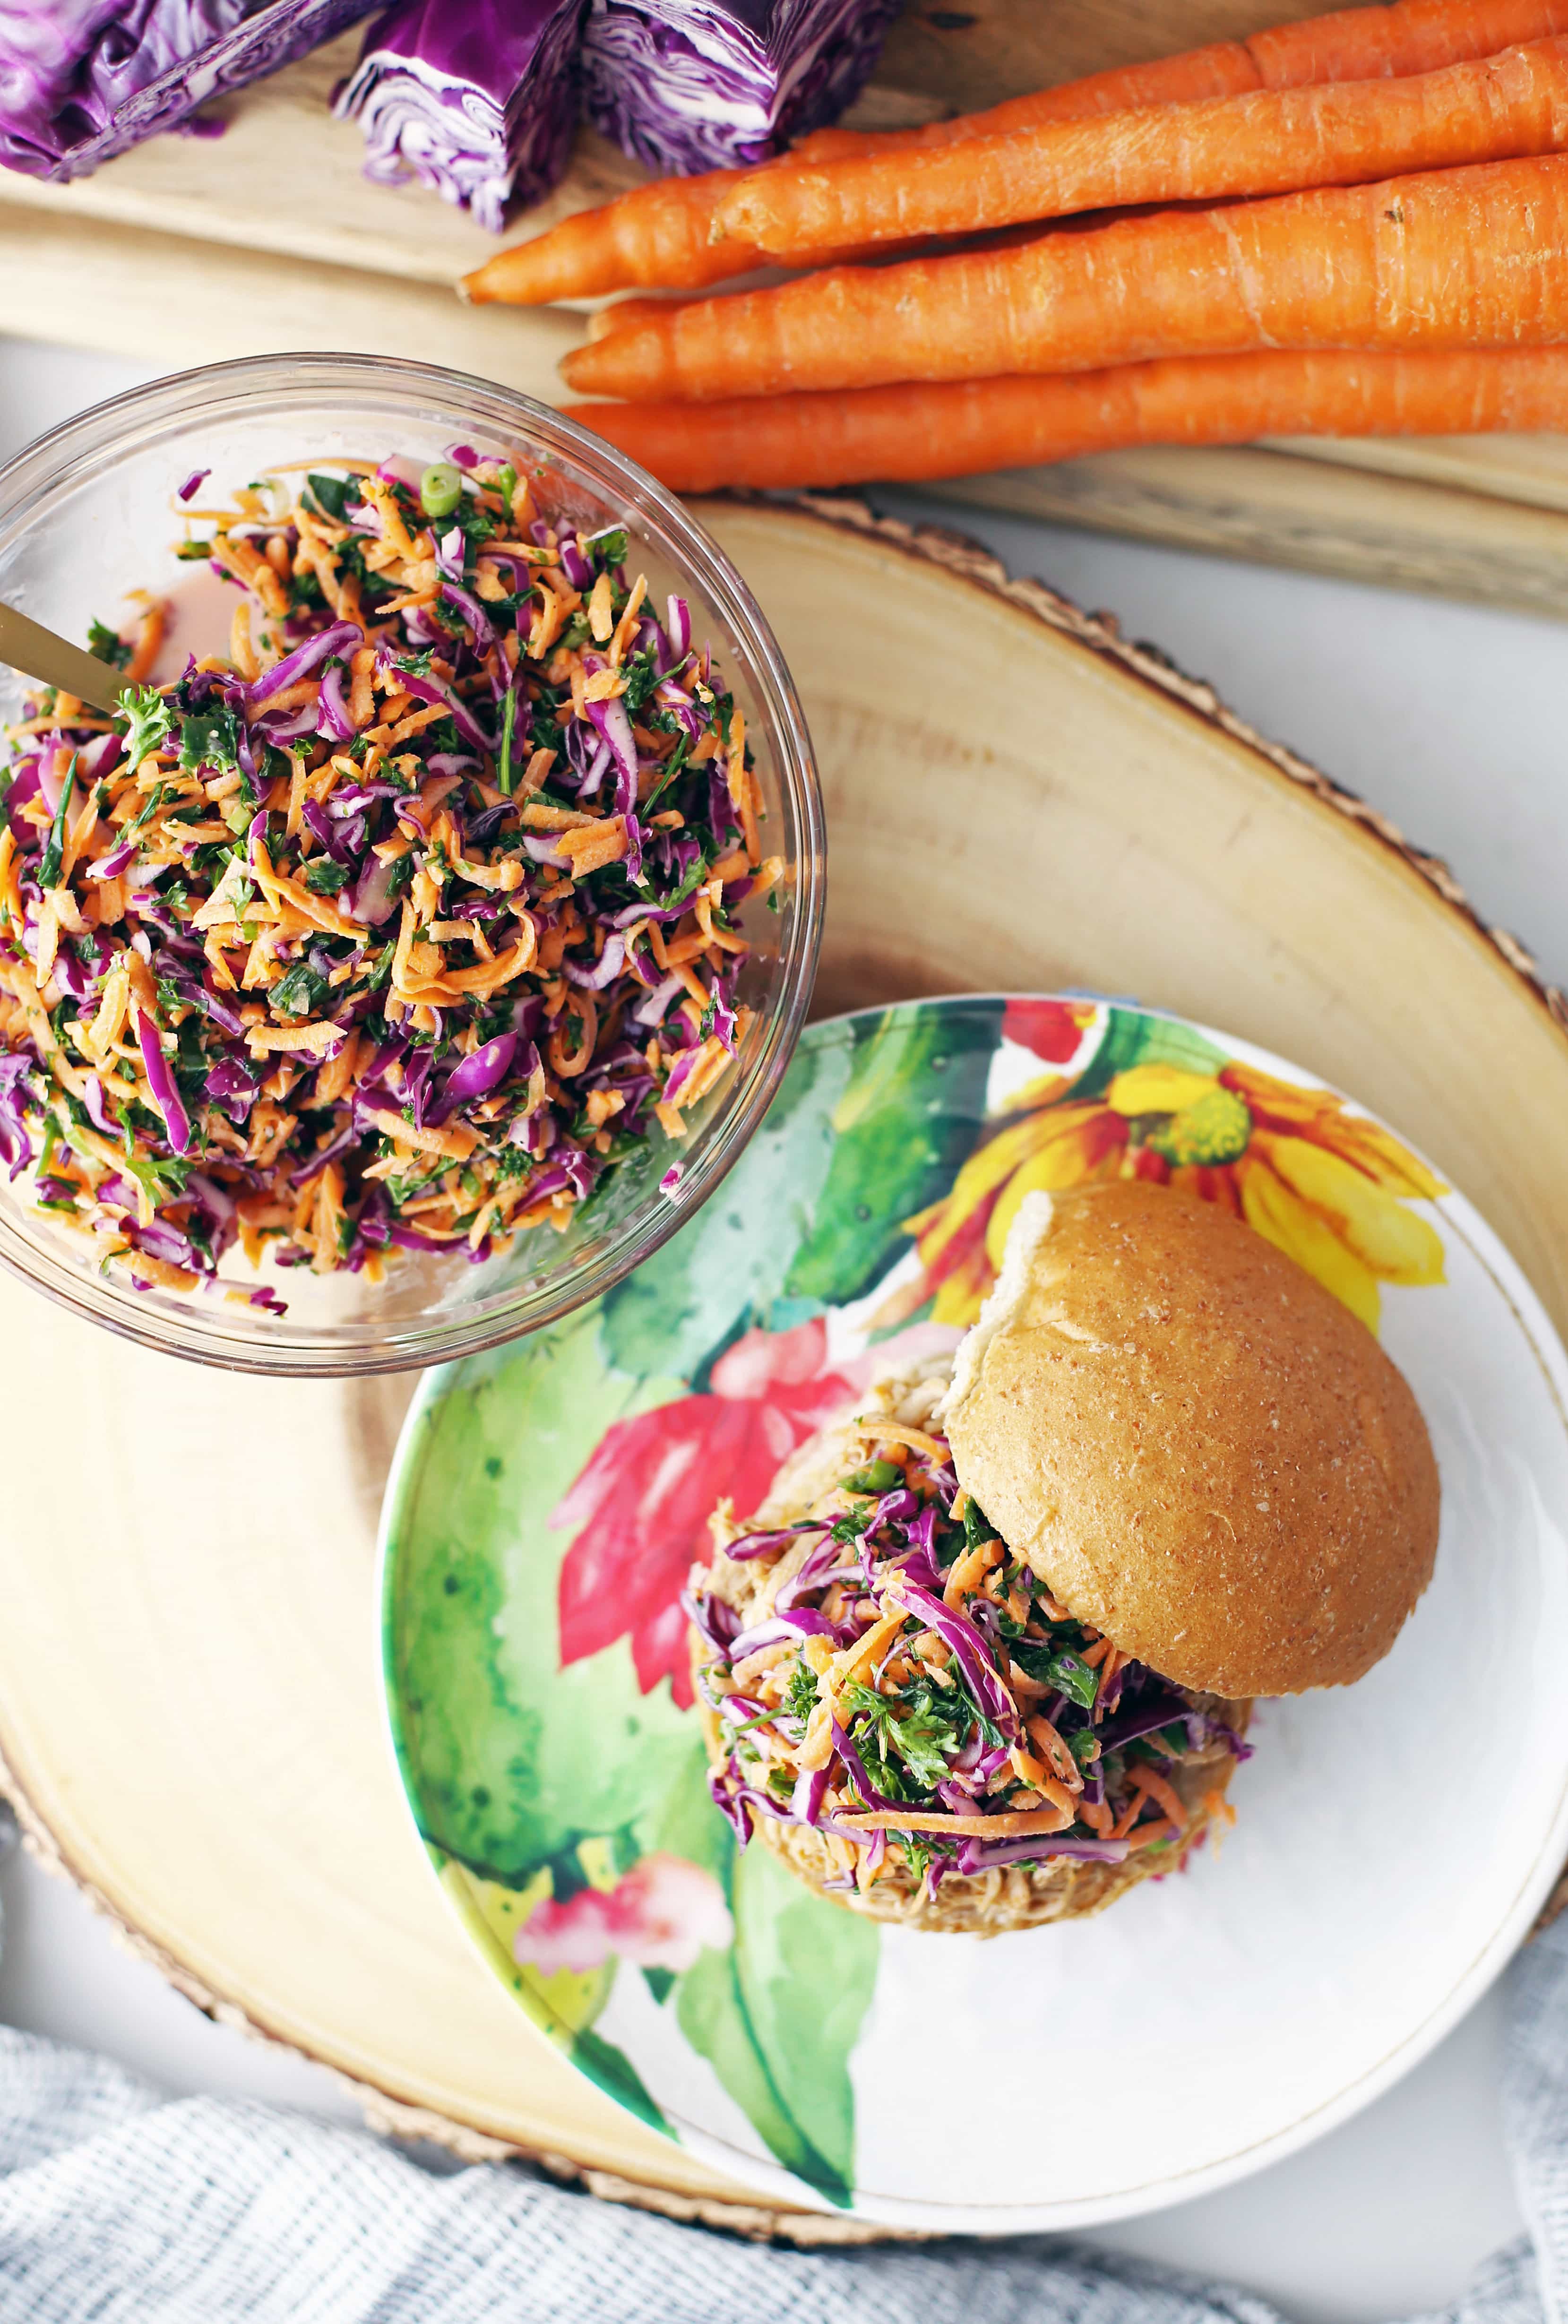 Overhead view of a glass bowl containing carrot cabbage coleslaw and a shredded chicken burger with coleslaw on top on a plate.